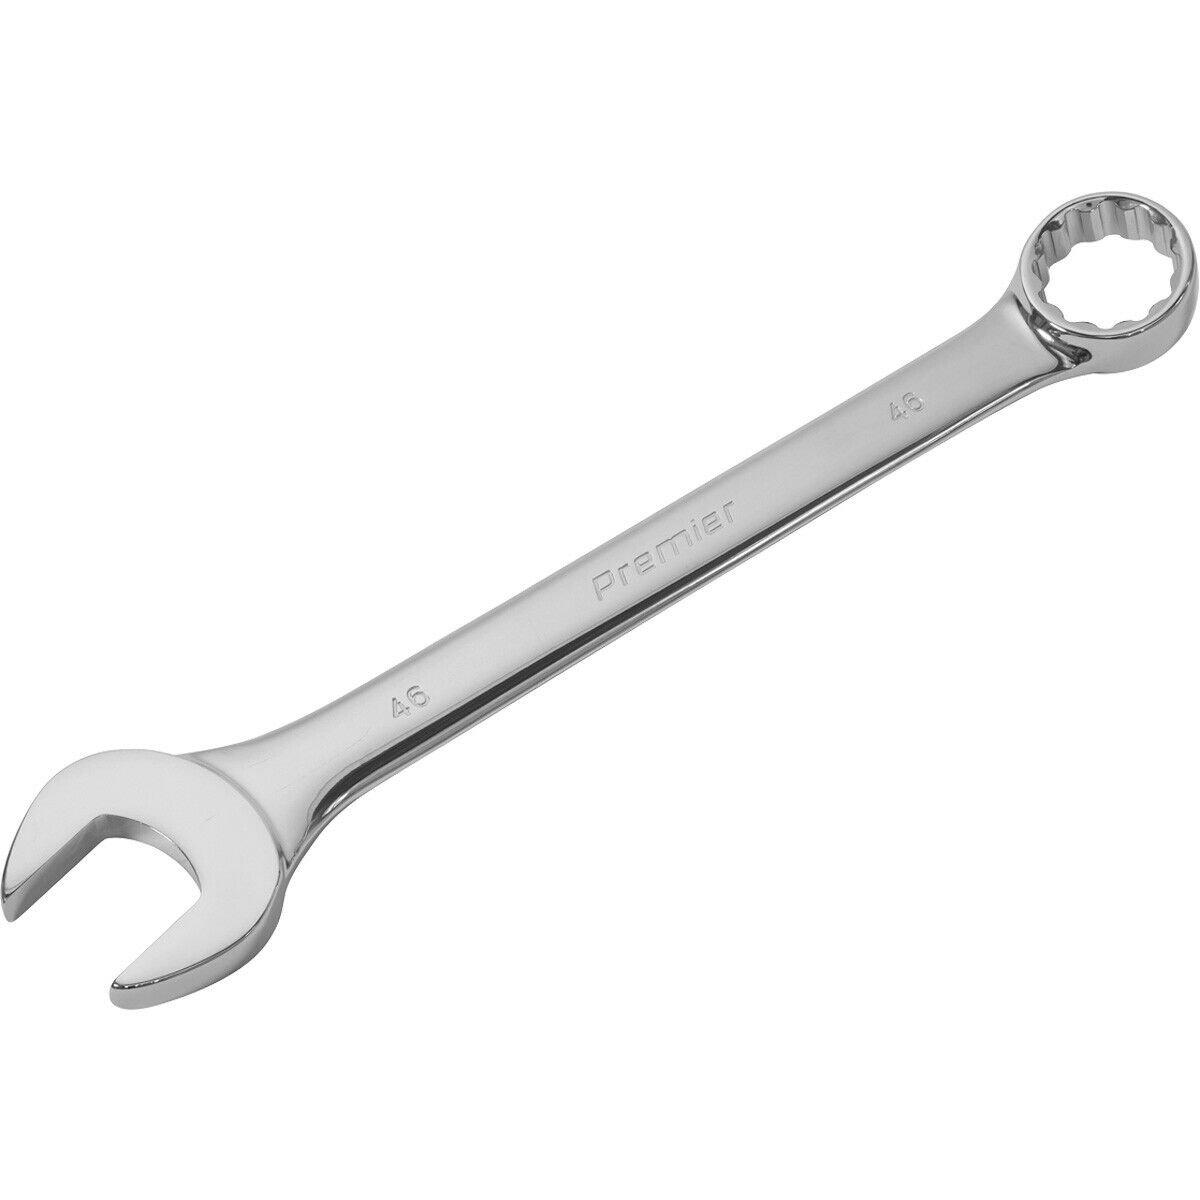 46mm EXTRA LARGE Combination Spanner - Open Ended & 12 Point Metric Ring Wrench